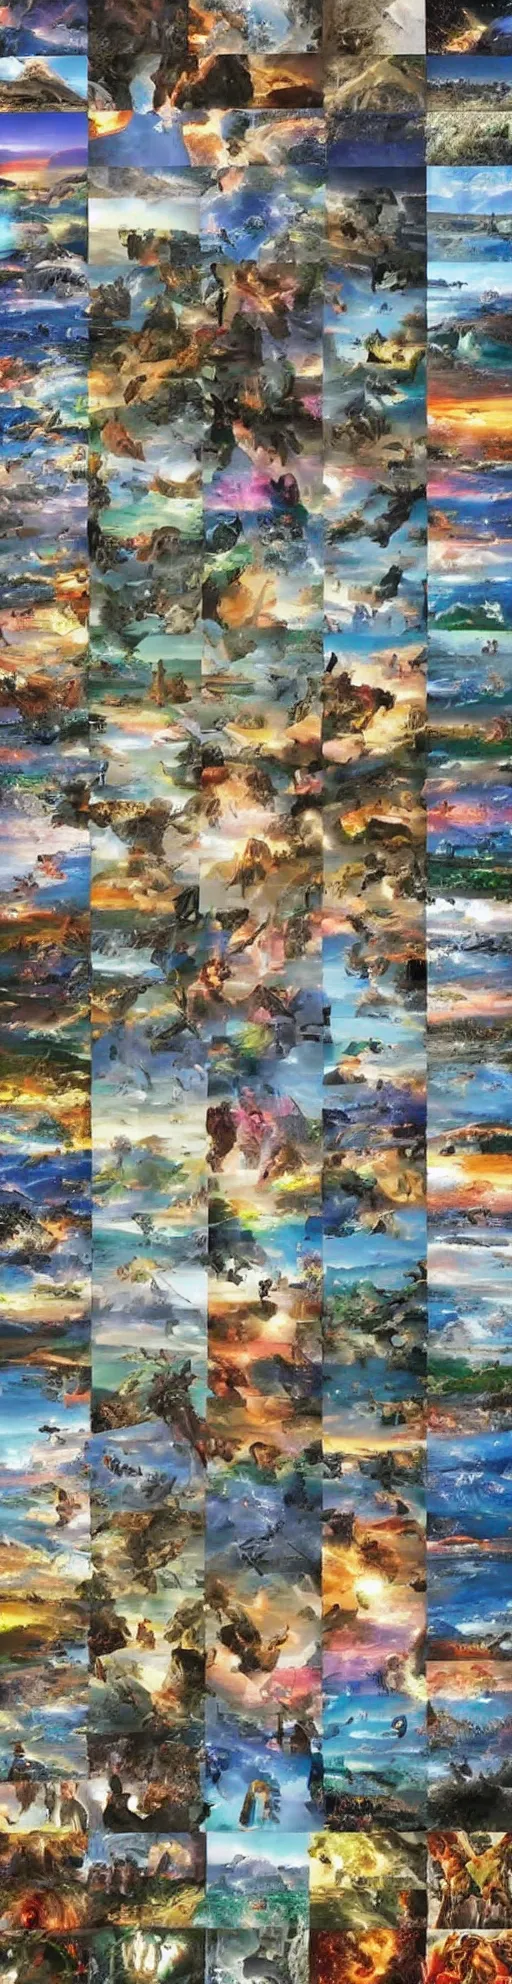 Image similar to grid of 1 6 thumbnails each containing an image of the worlds most beautiful artwork